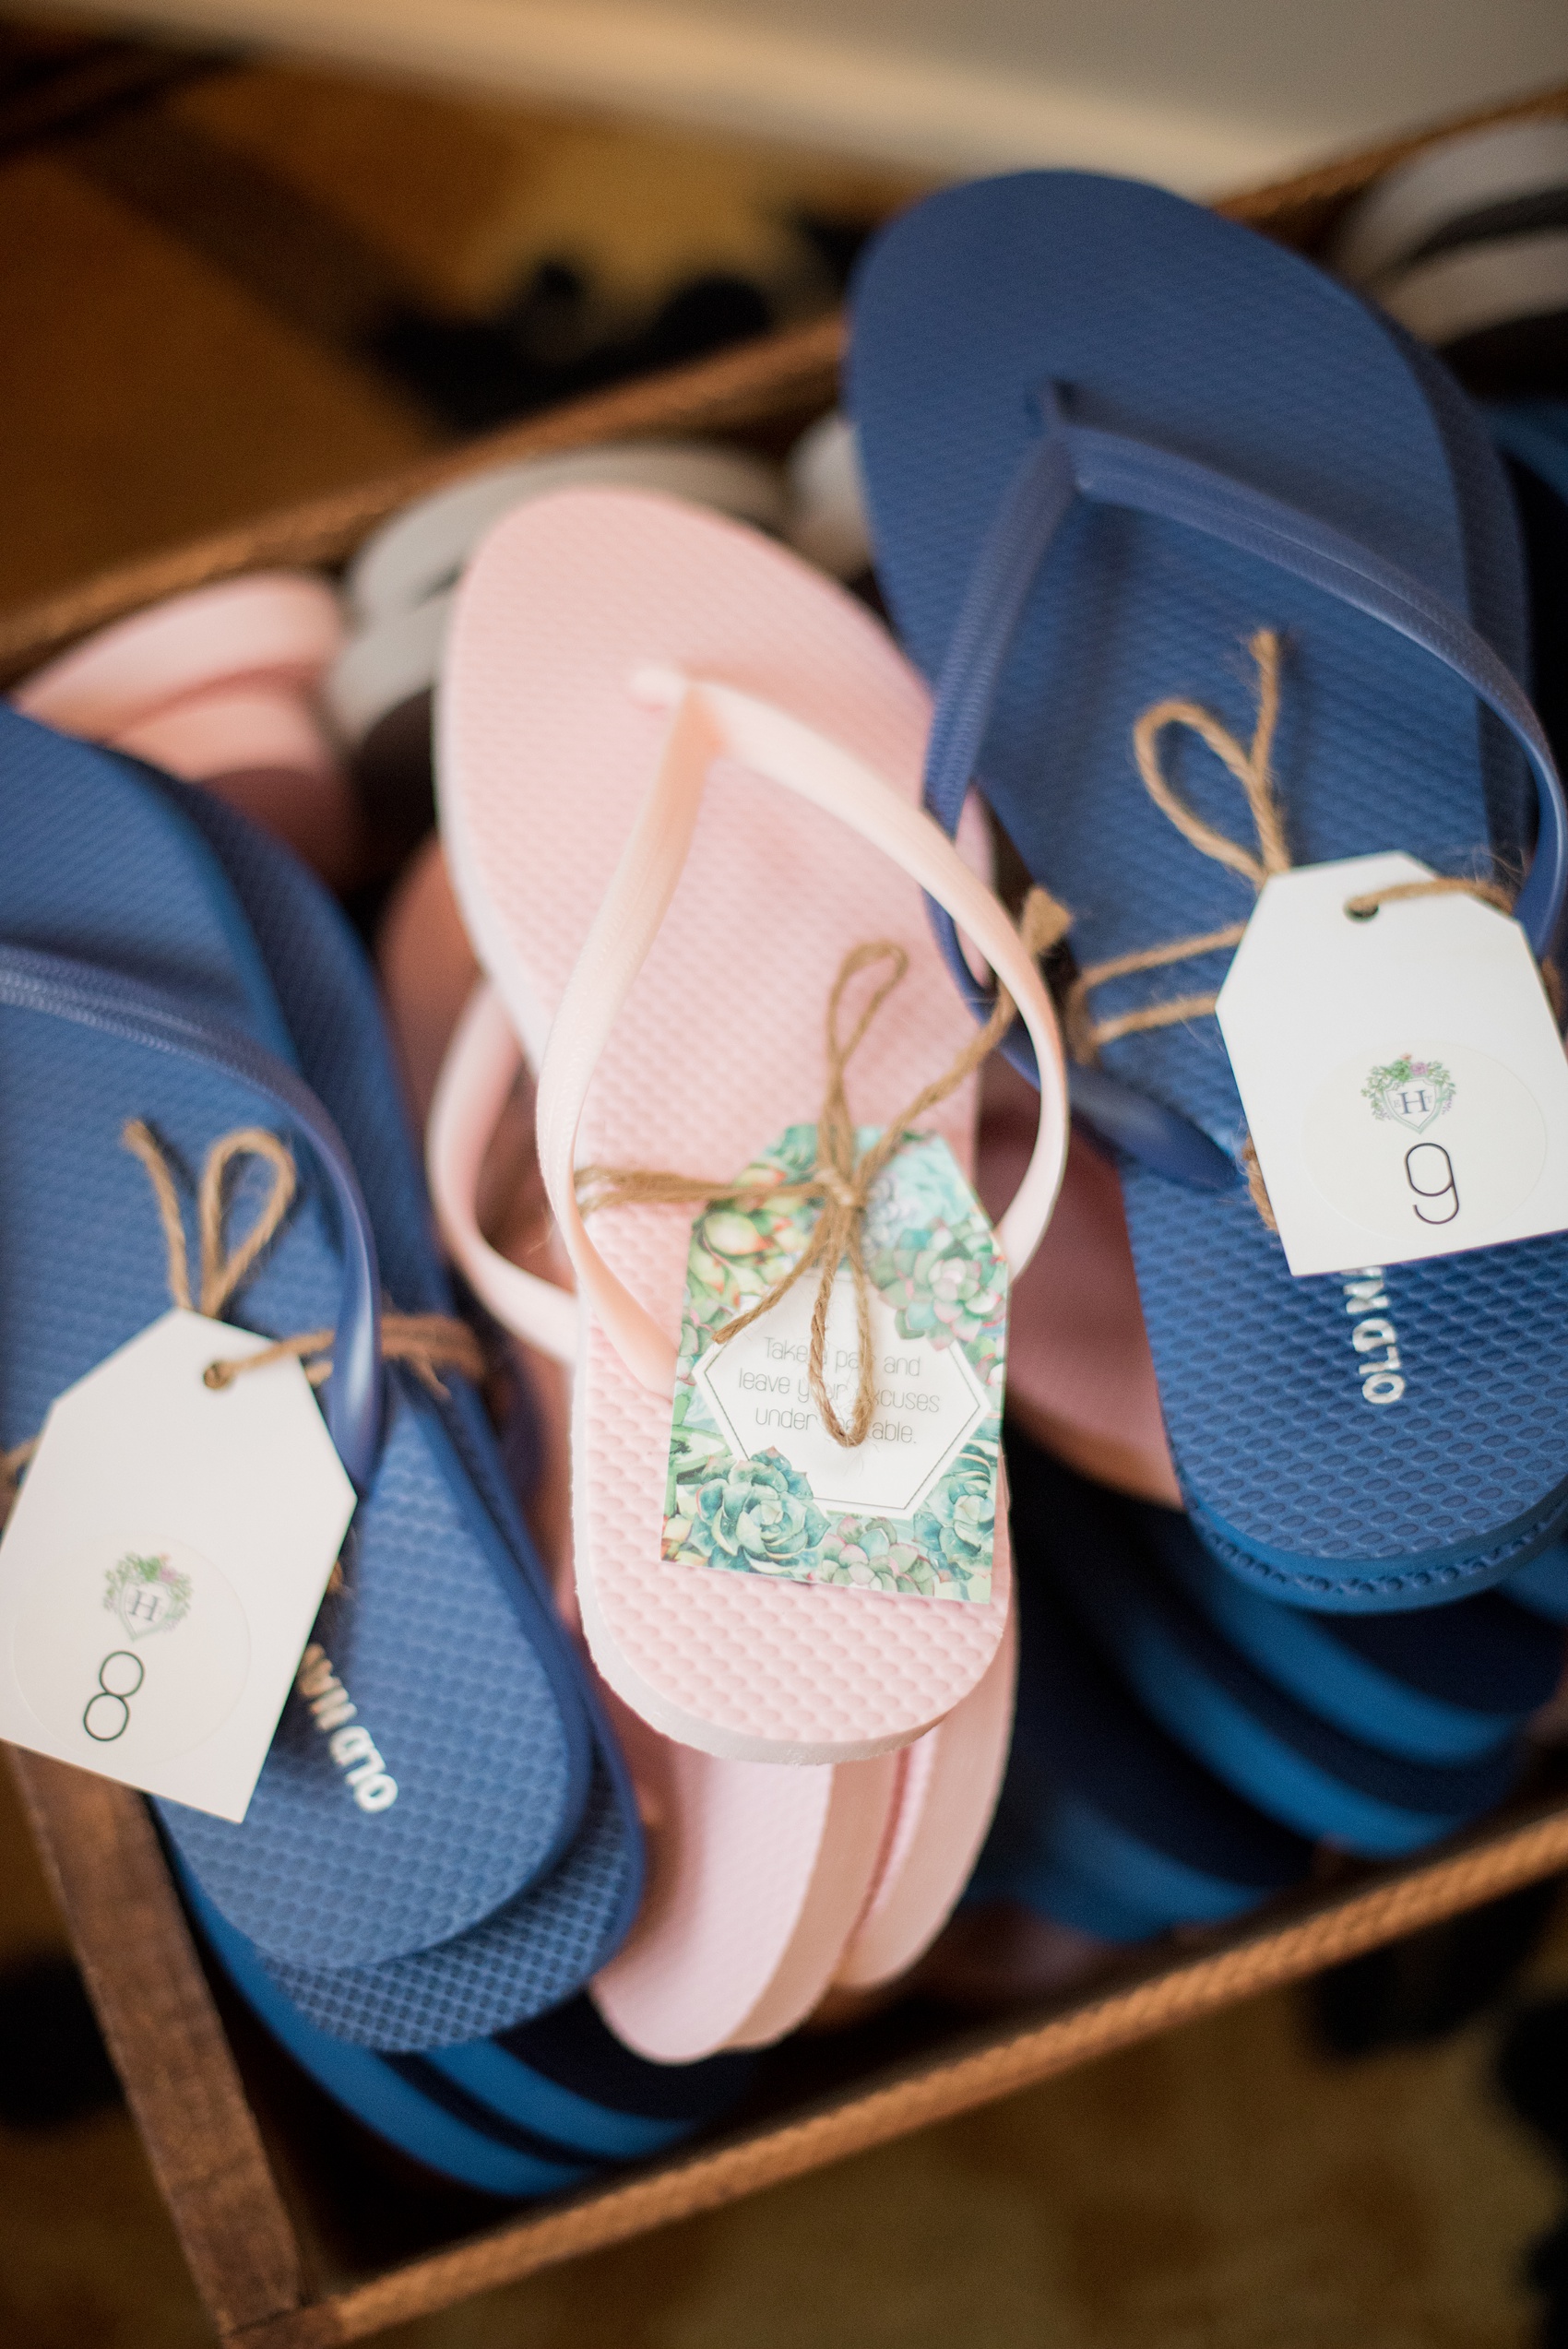 Crystal Springs Resort wedding photos in New Jersey, with photographer Mikkel Paige Photography. The couple’s spring wedding had an outdoor ceremony with photos at this rustic, woodsy venue showing their blue and pink palette decor from getting ready to their reception. This picture shows the flip flops the bride and groom provided for guests on the dance floor. Click through to see their complete wedding recap and more inspiration like this! #NewJerseywedding #MikkelPaige #NJweddingphotographer #NJphotographer #springwedding #pinkandblue #weddingflipflops #weddingreceptionideas